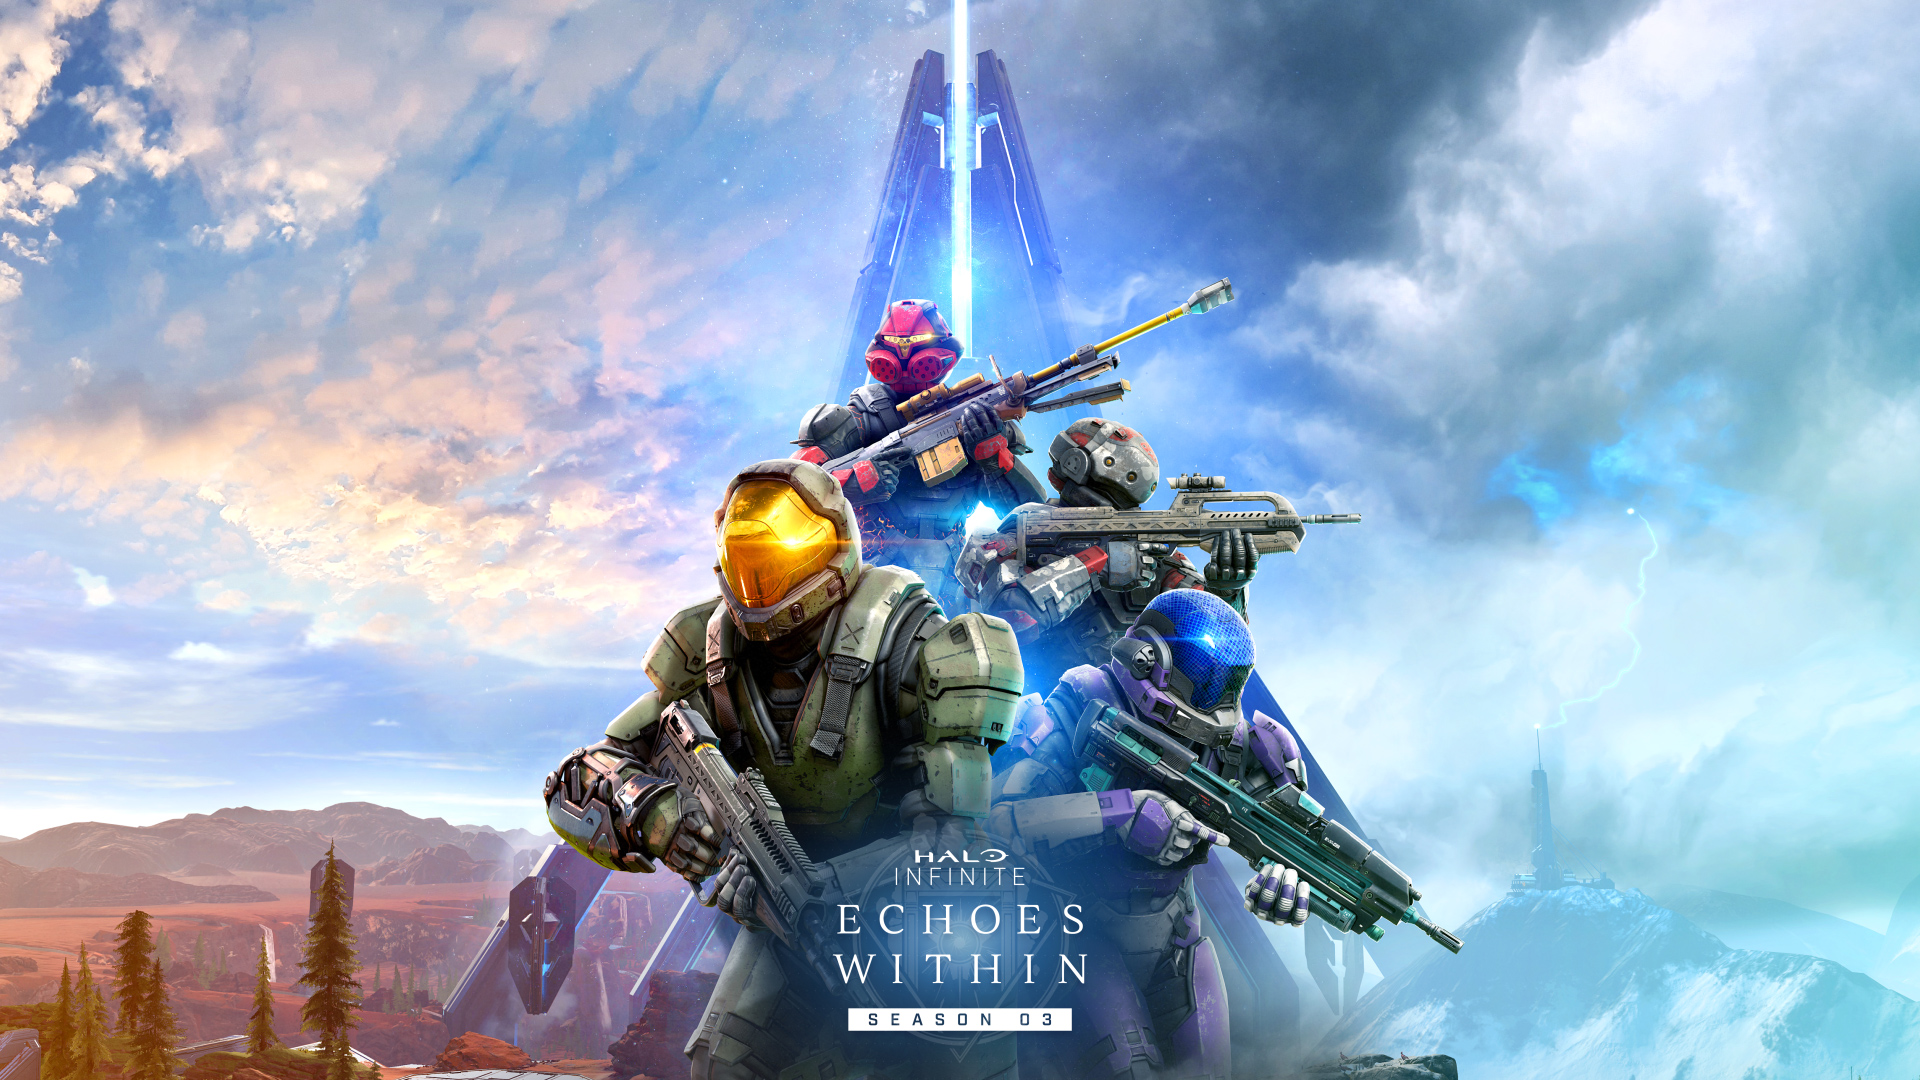 Halo Infinite Season 2 starts now, with a new battle pass